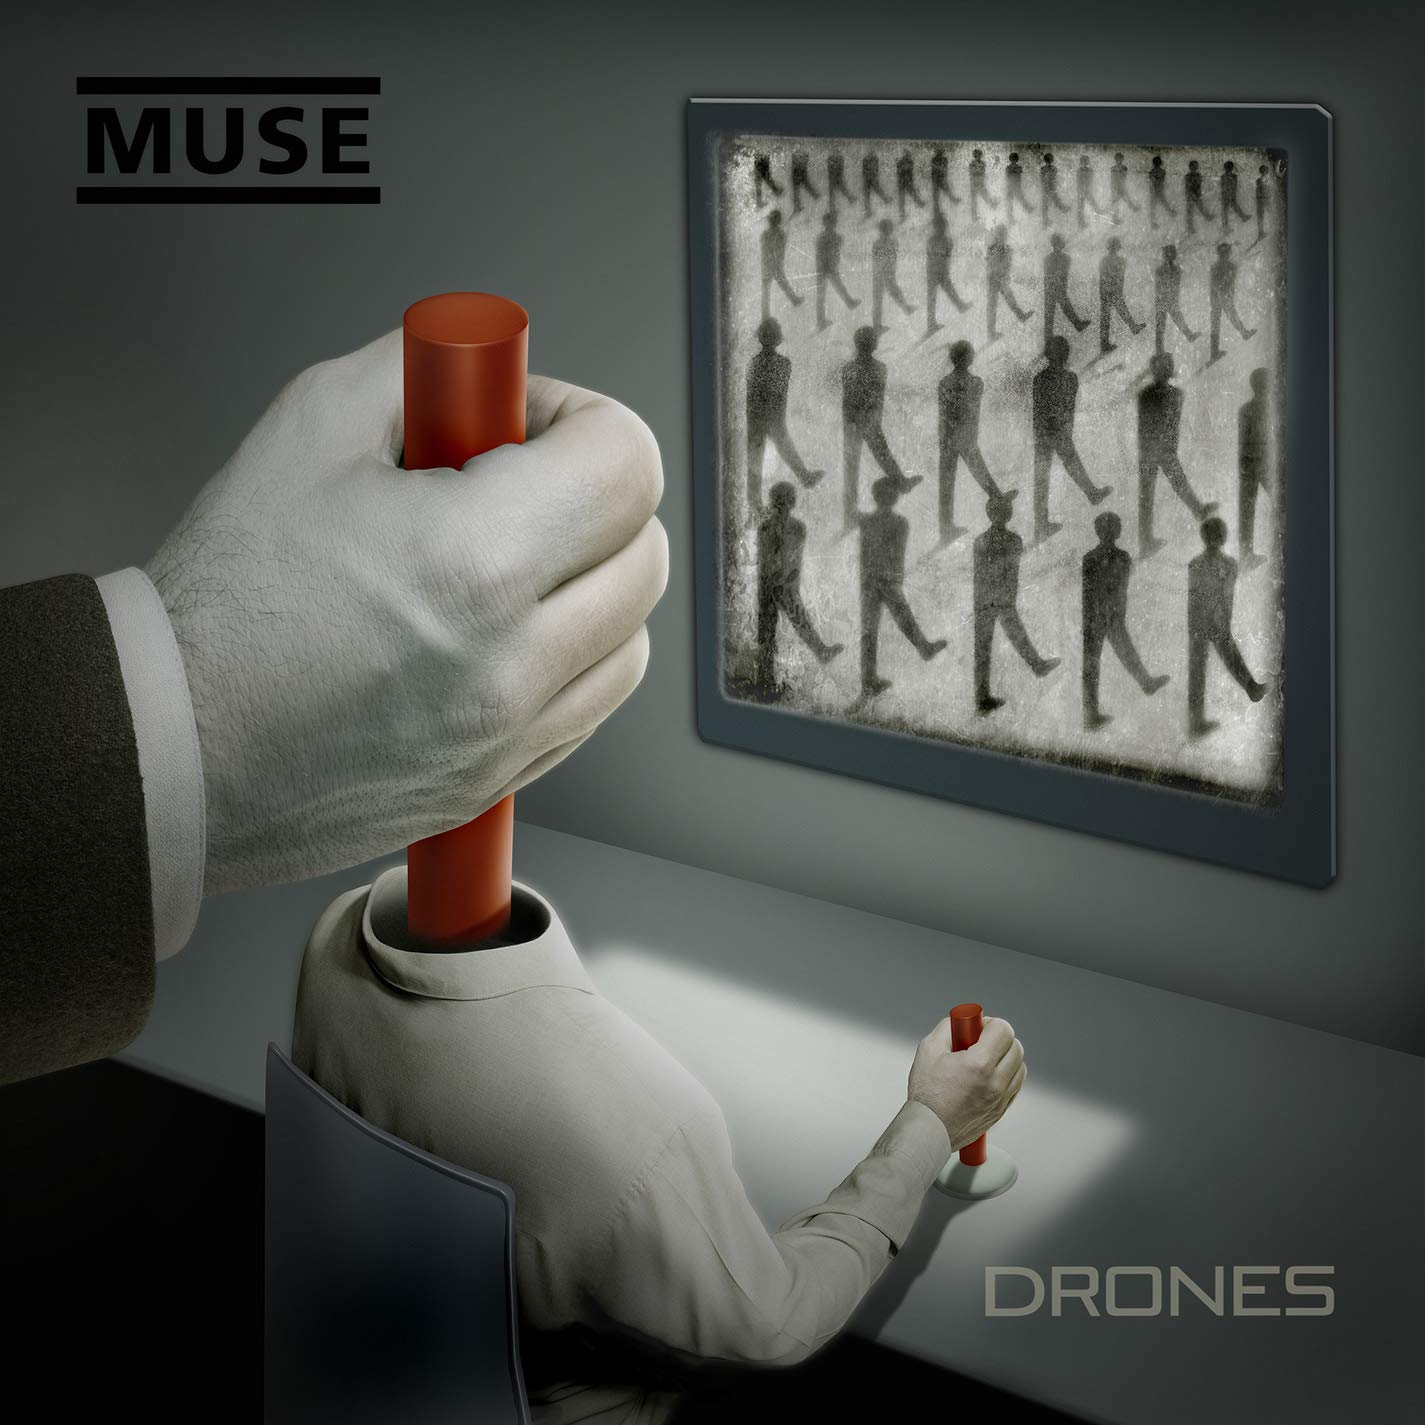 Muse - Drones - CD/DVD